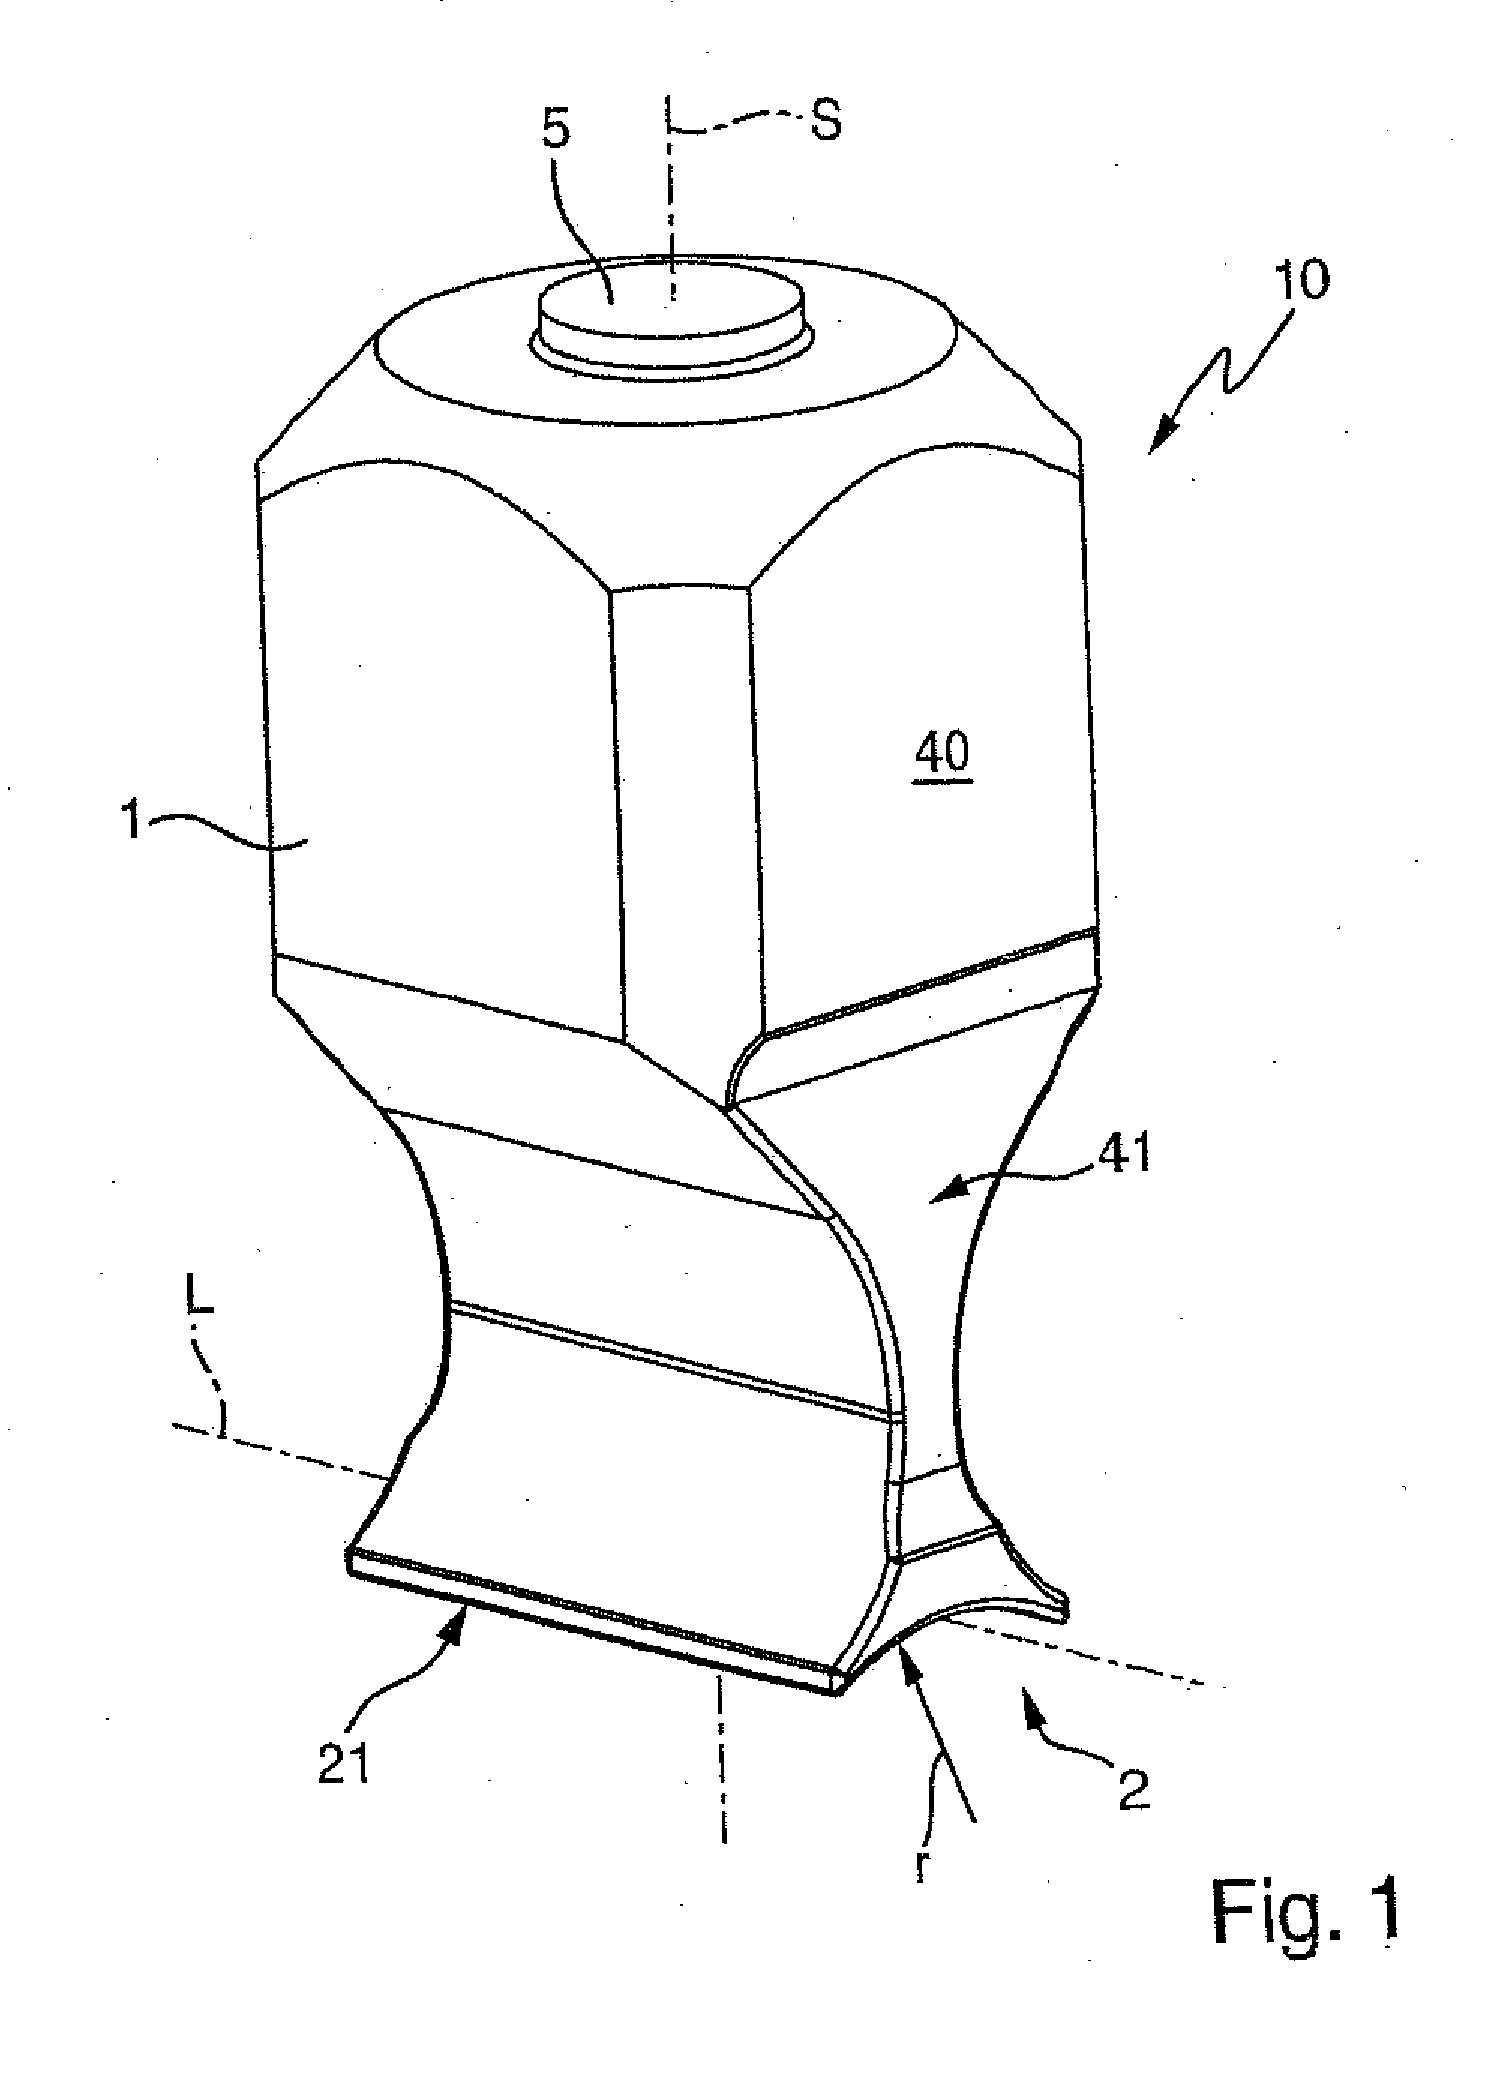 Sonotrode and device for reducing and eliminating foaming of liquid products